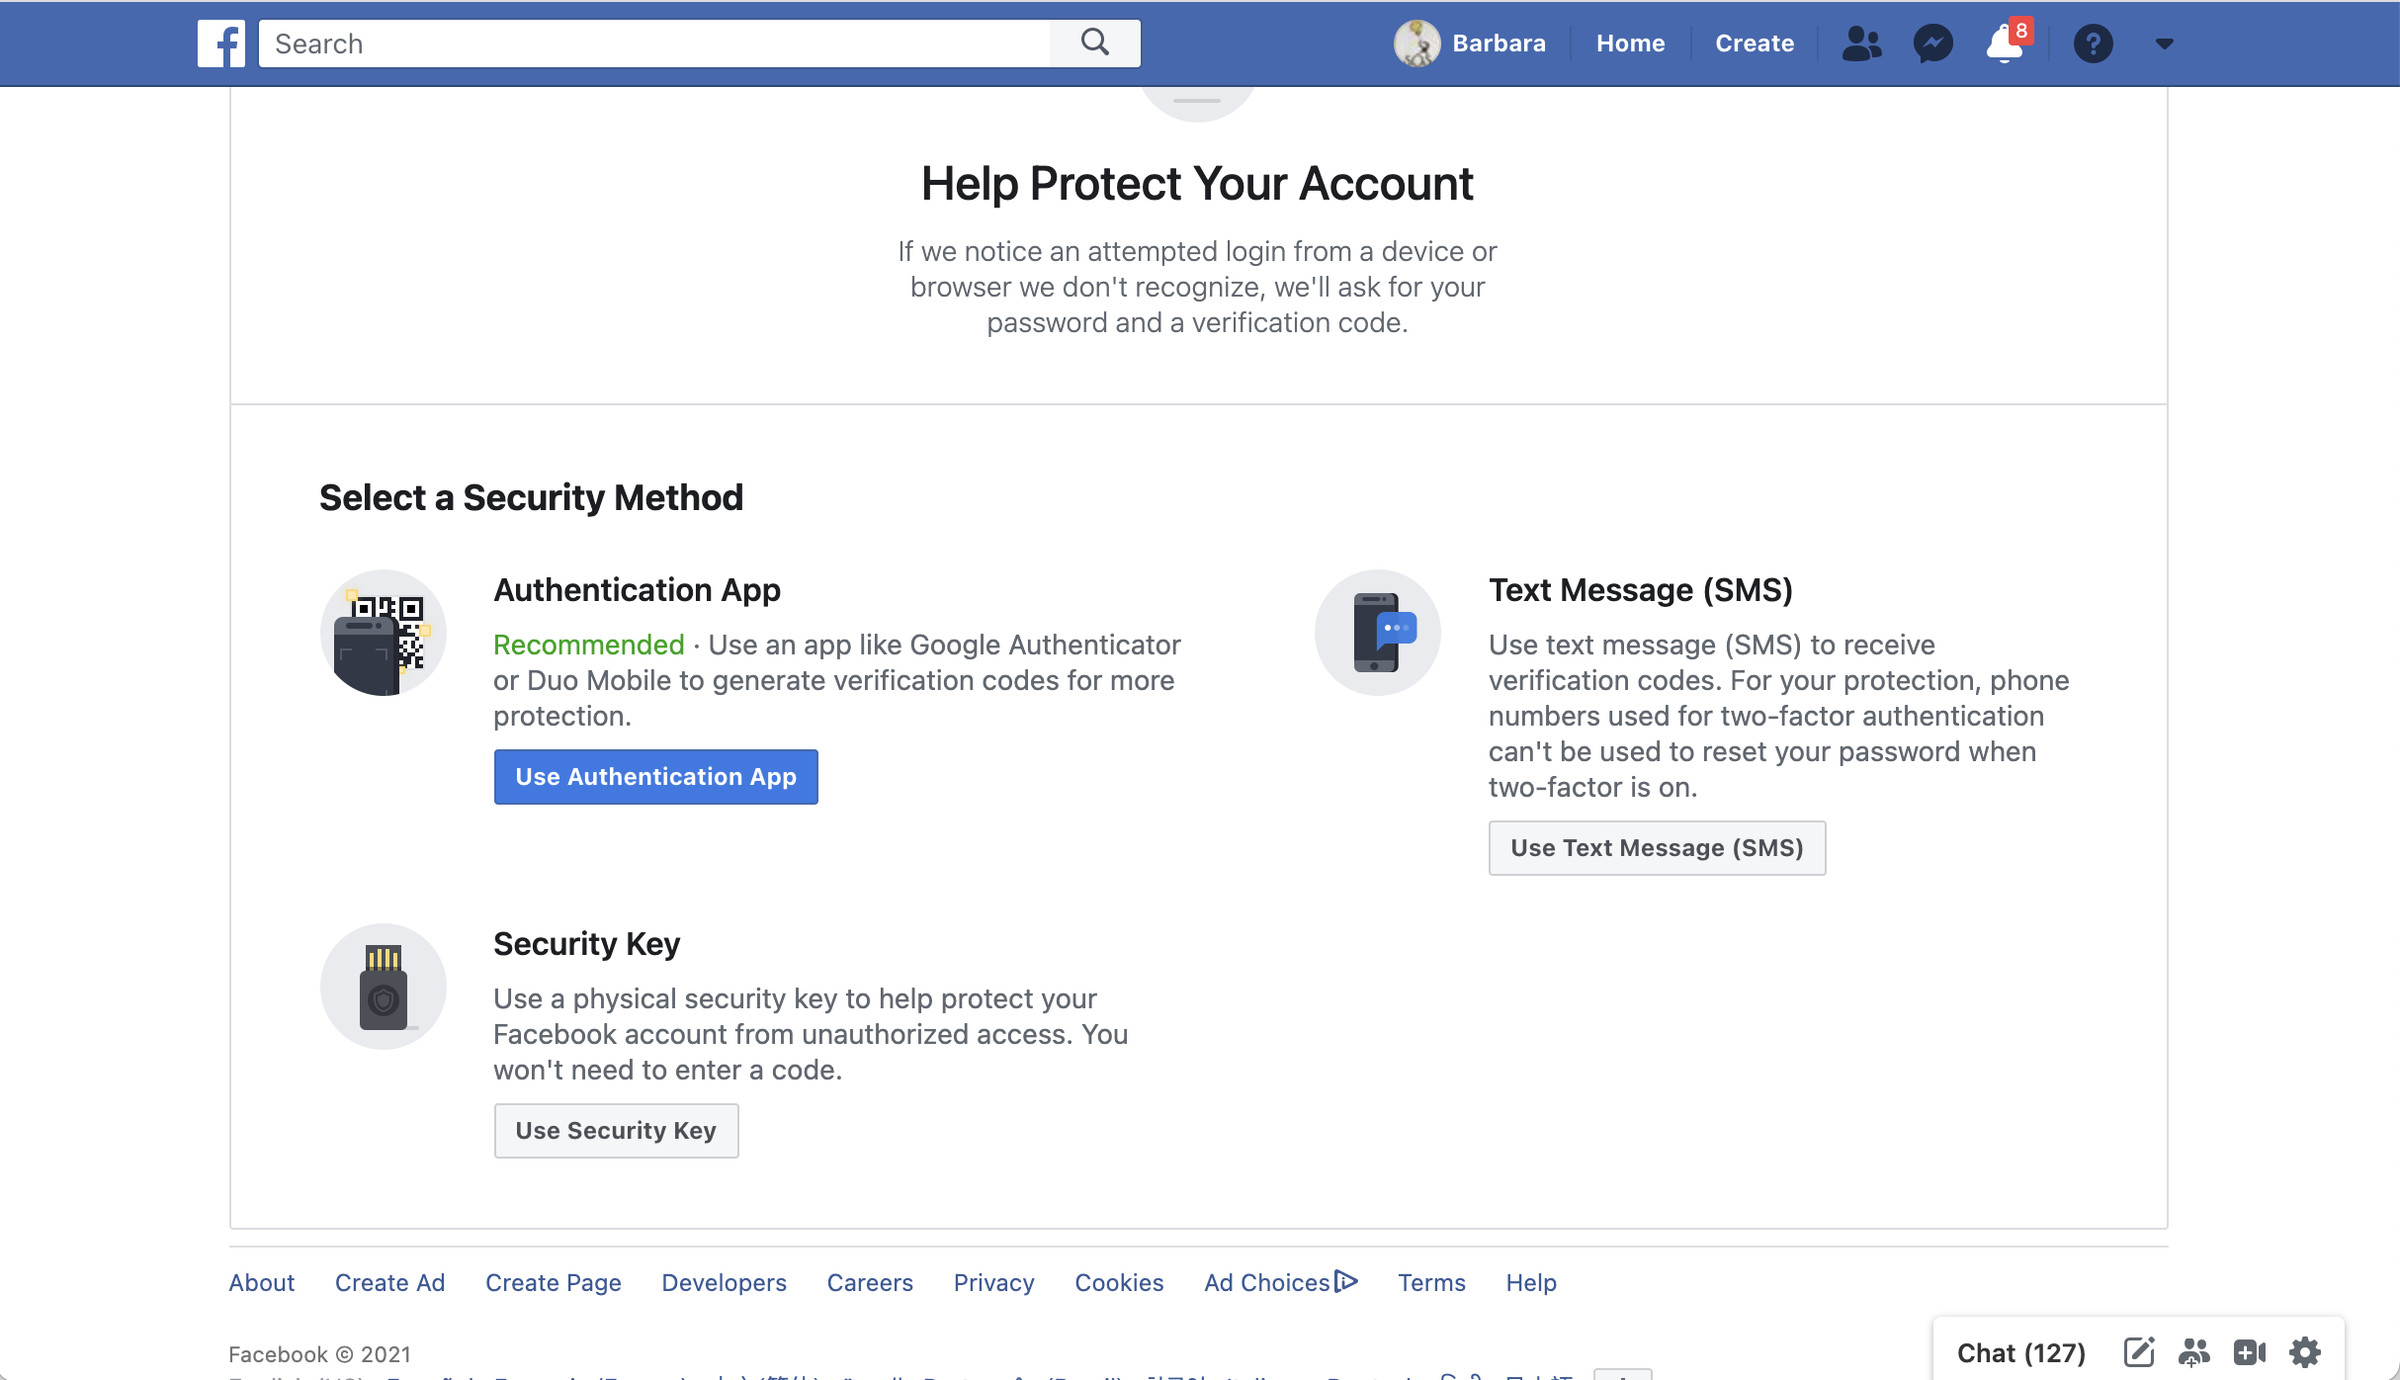 Facebook lets you authenticate via text message, an authenticator app, or a security key.